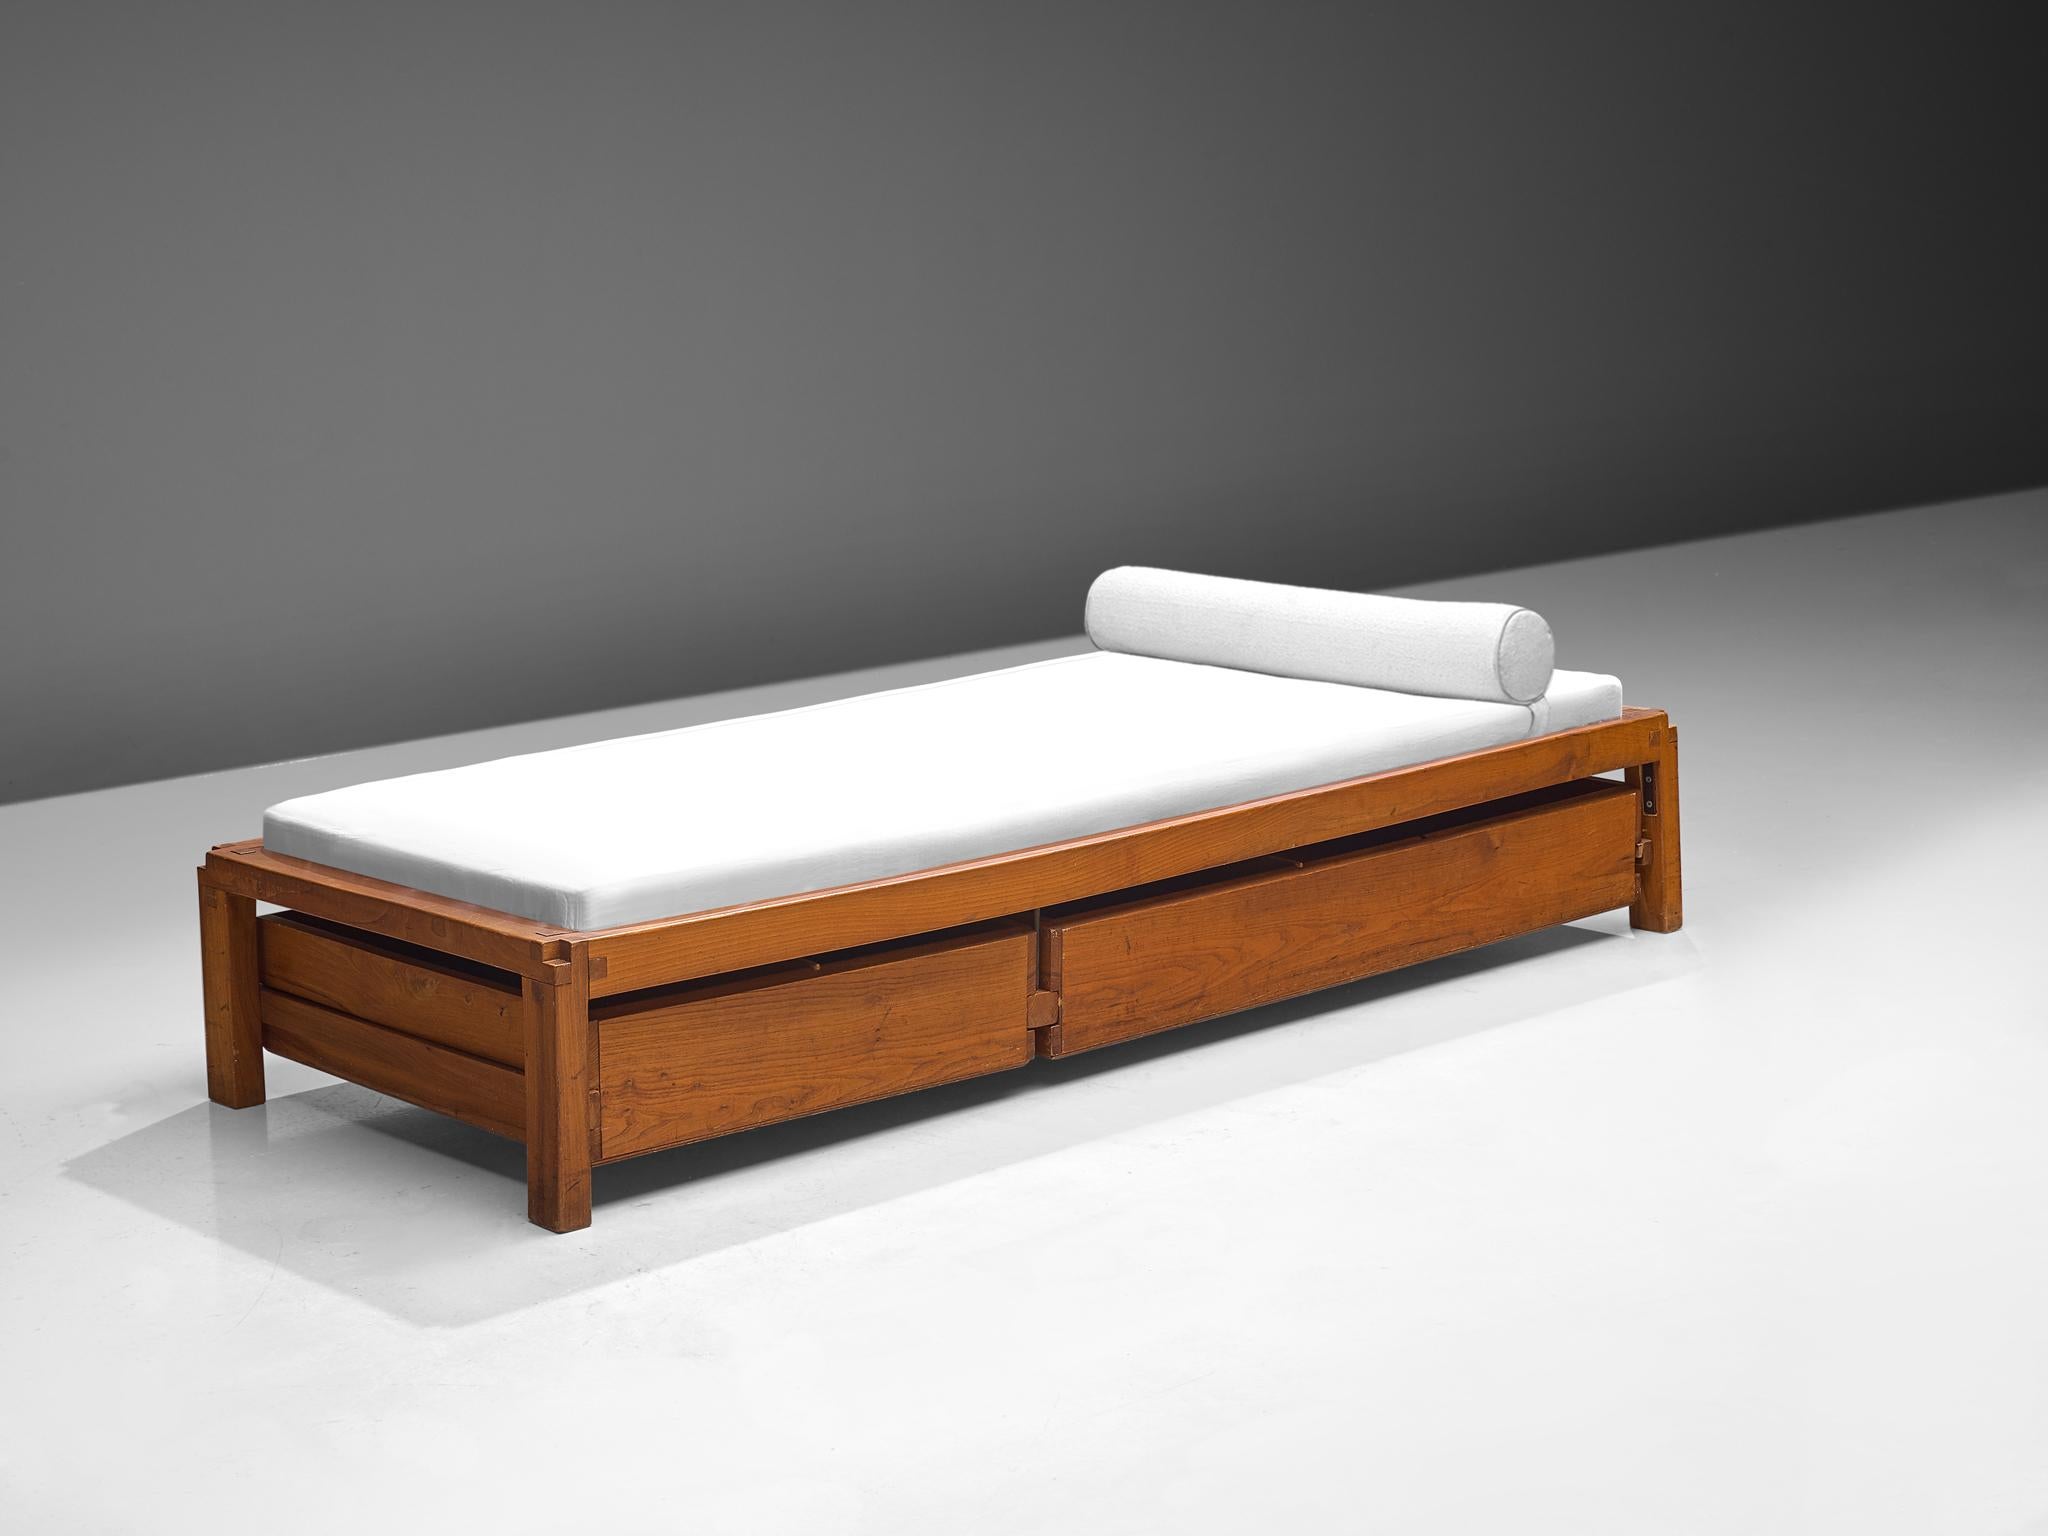 Pierre Chapo, single bed model L03, solid elm, France, 1965

Excellent designed single bed with the characteristic wood connections of Pierre Chapo. The L03 is a (day)bed whose minimal design was a rarity at that time - all superfluous elements